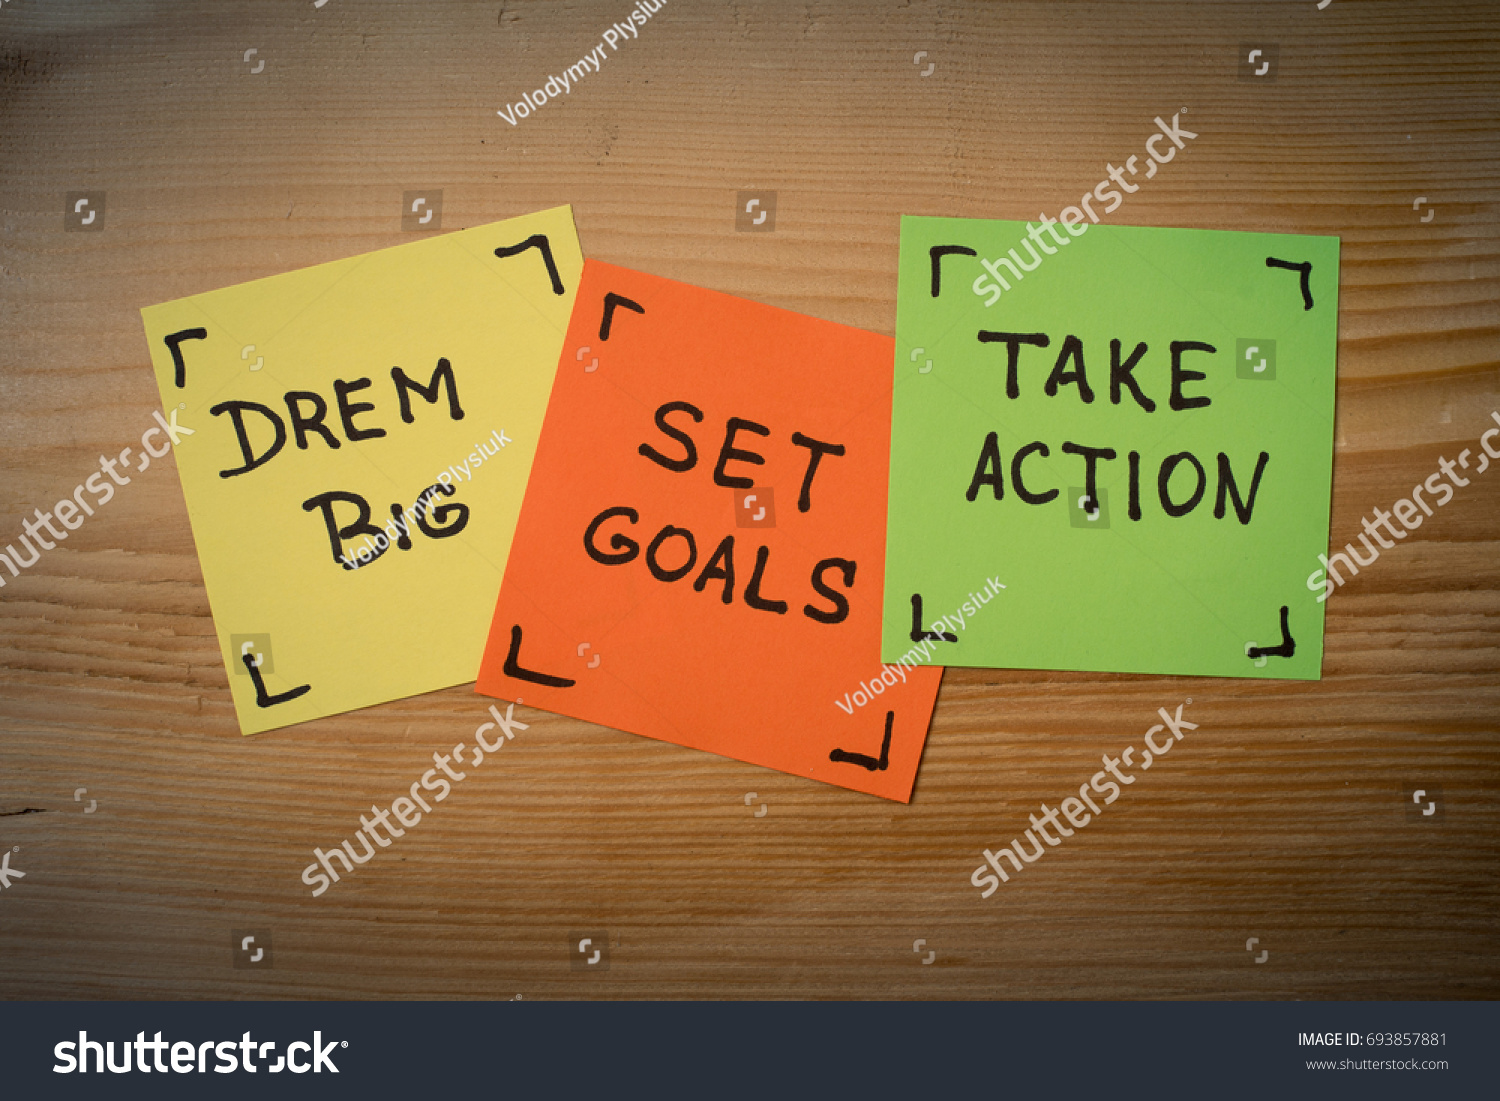 Dream big, set goals, take action, success recipe on wooden background. dream big, set goals, take action - motivational advice or reminder on colorful sticky notes against rustic wood #693857881